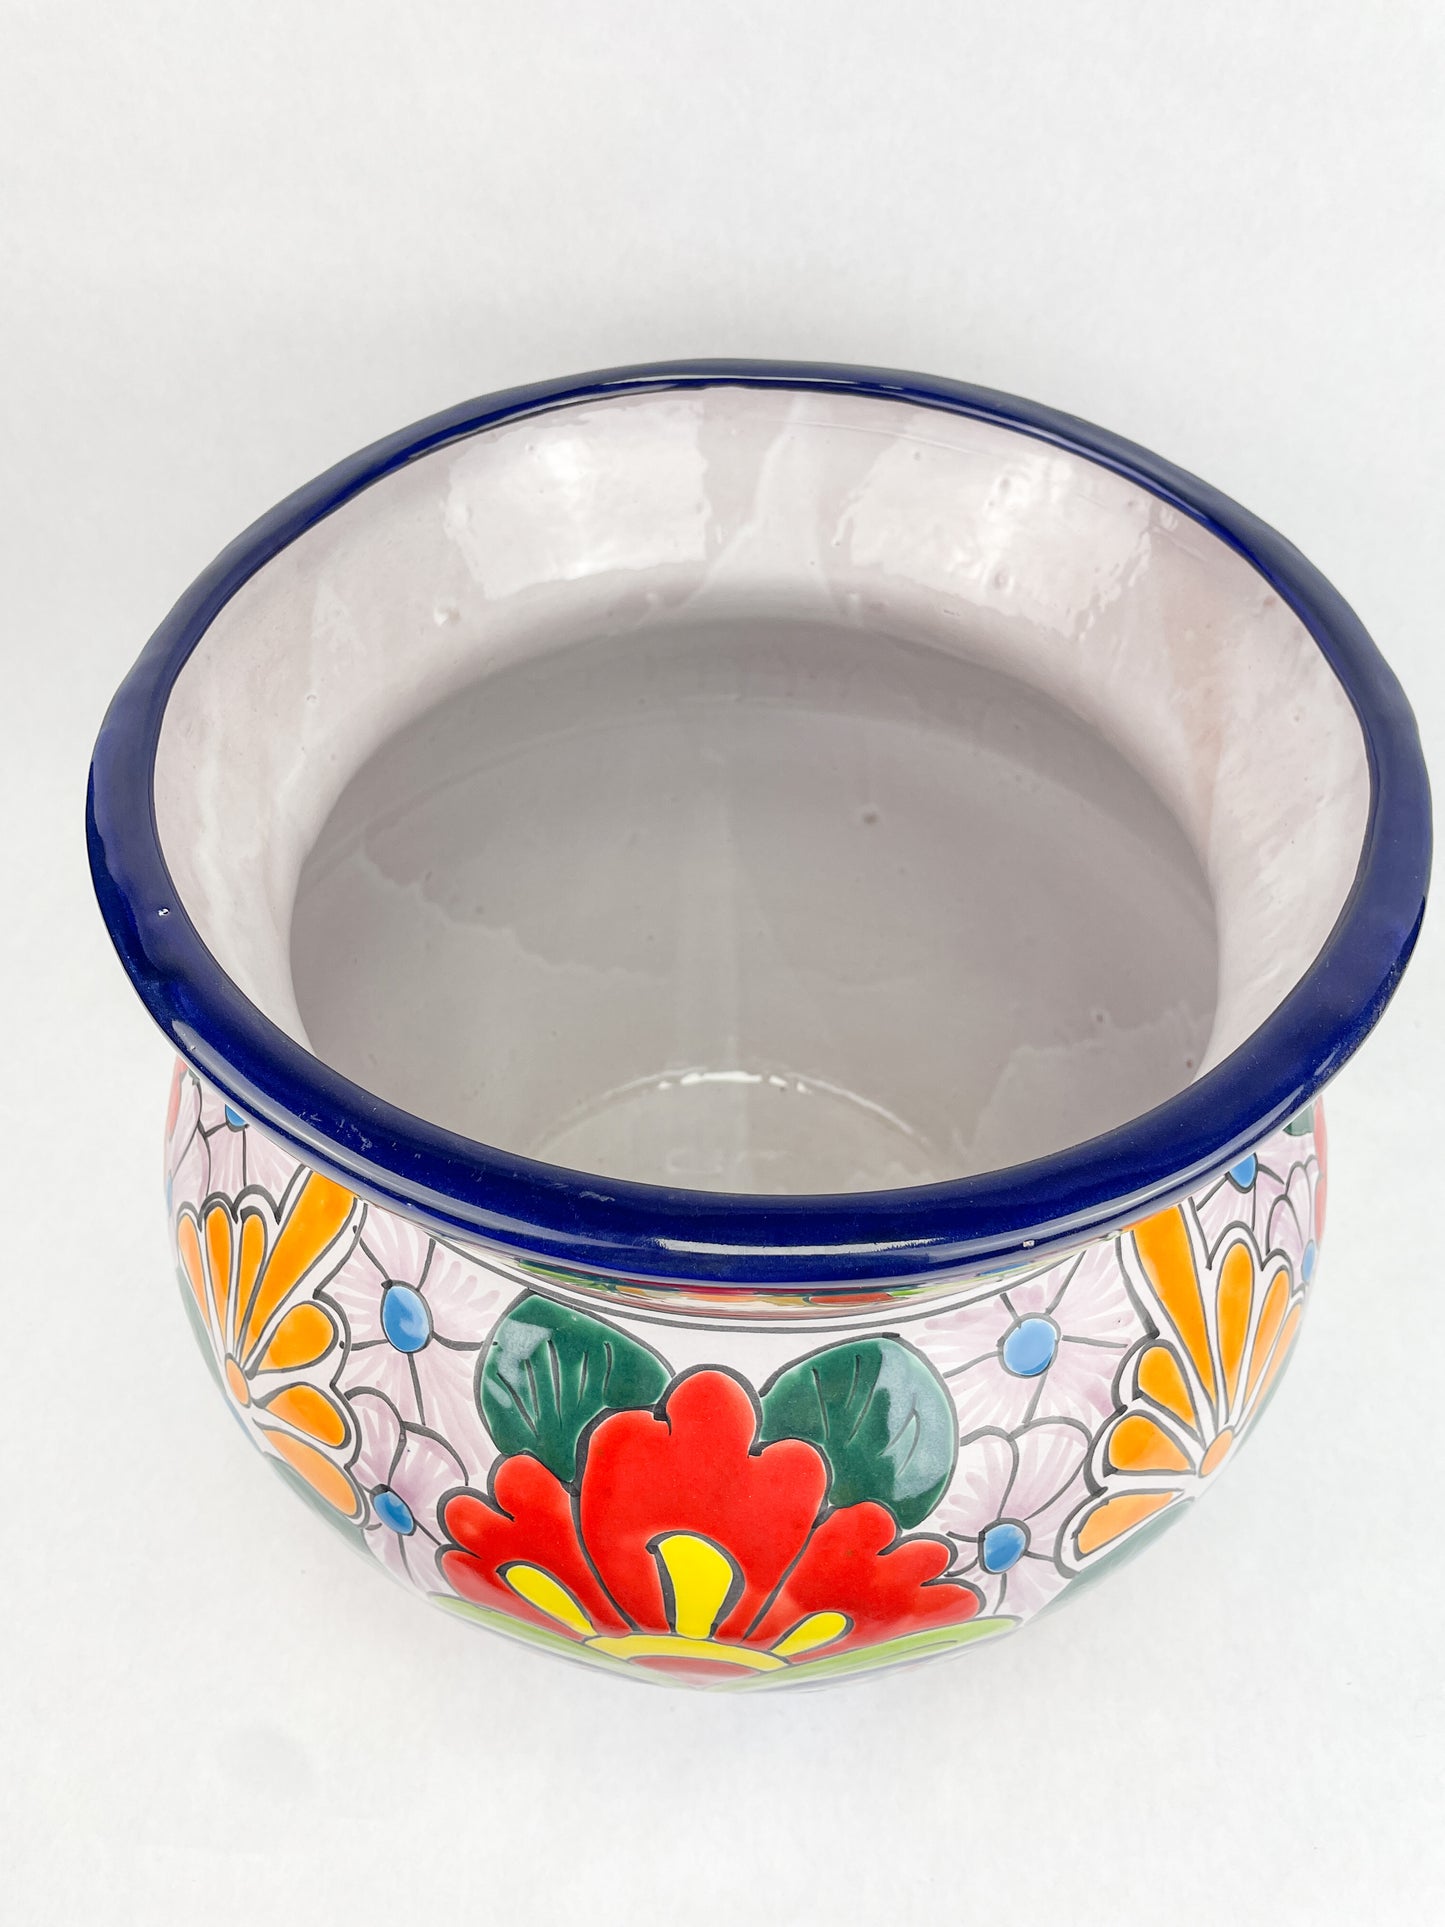 Mexican Planters Mexican Pottery Planters Large Mexican Pottery Planters Talavera Planters